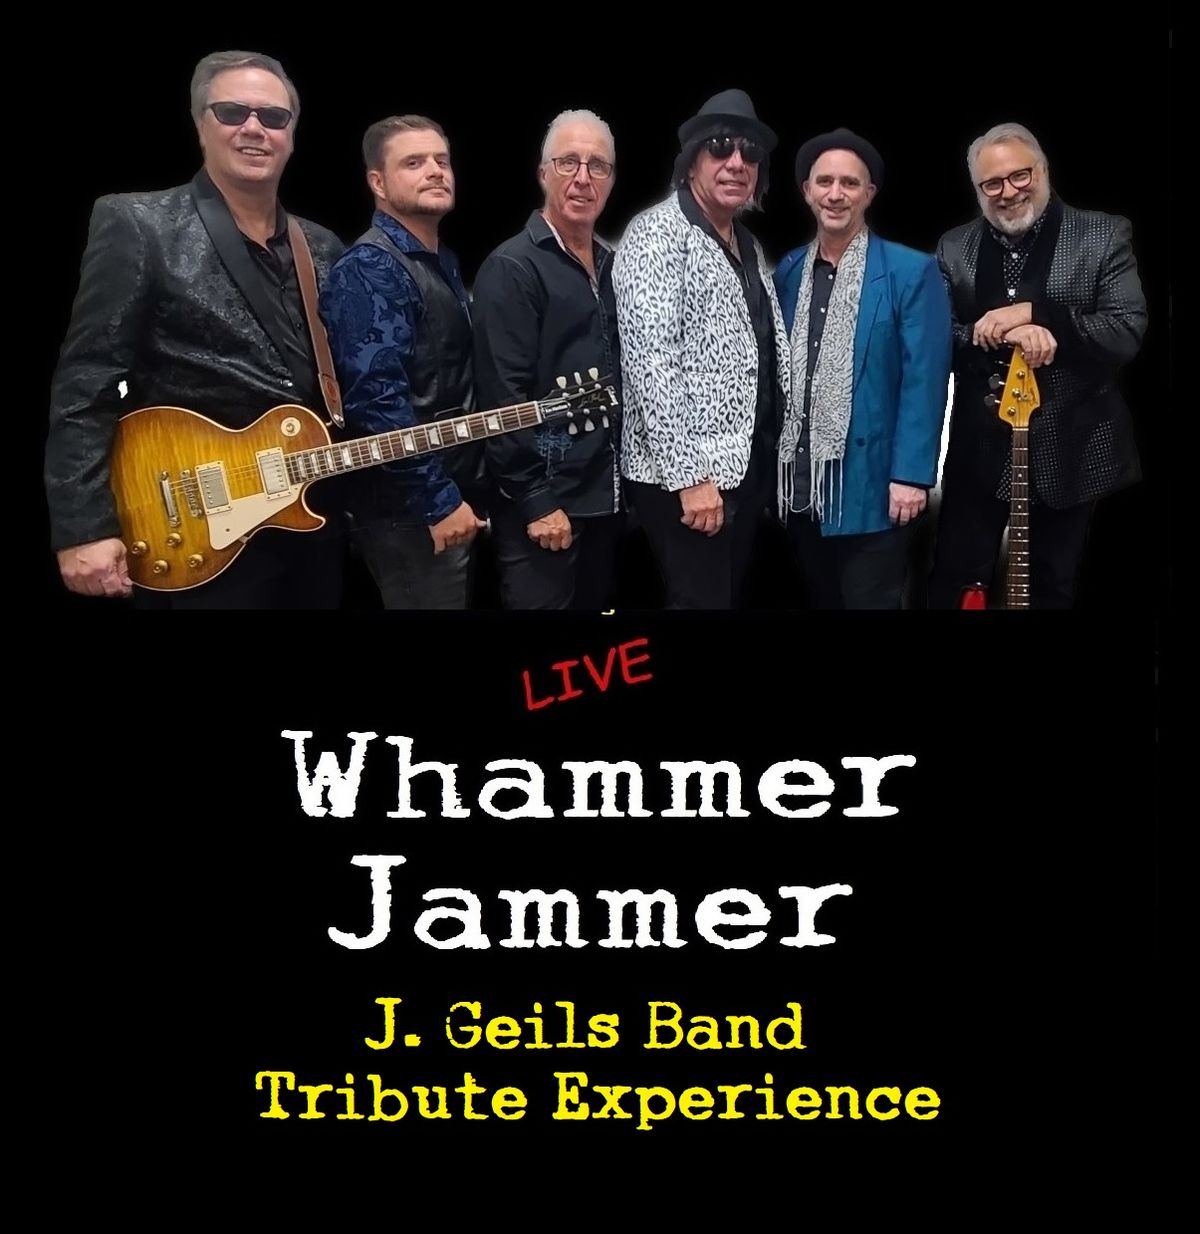 Whammer Jammer - The J. Geils Tribute Experience returns to The District in Taunton MA